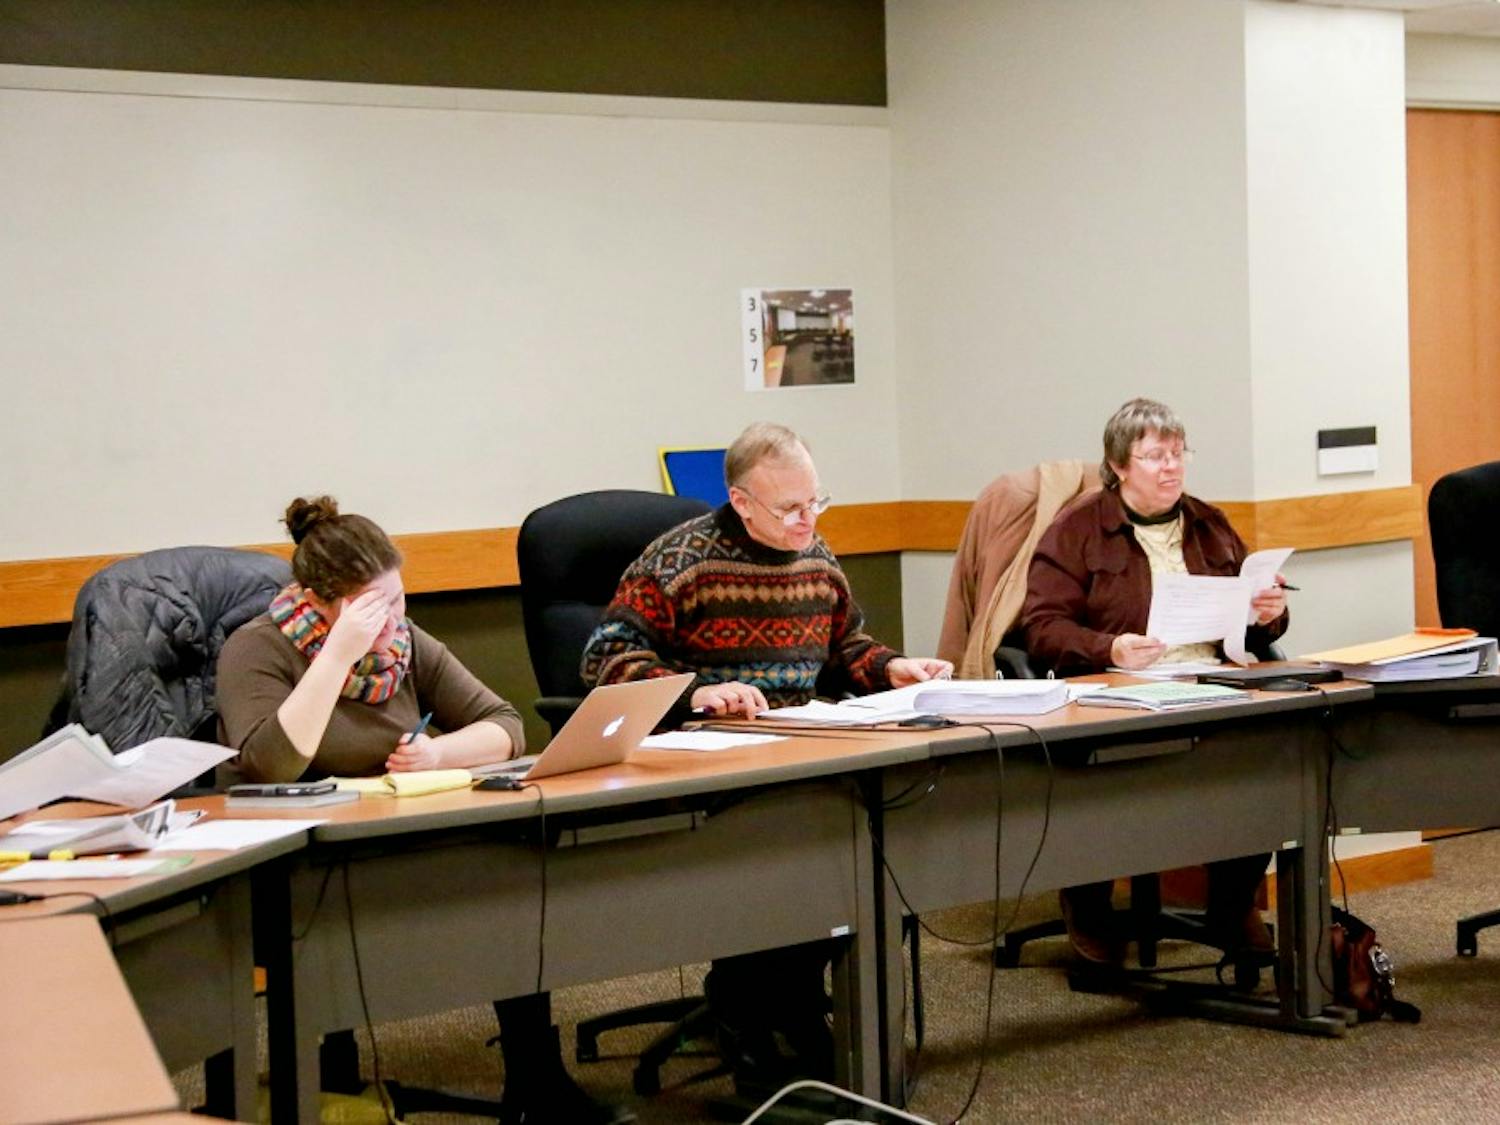 A Dane County Board subcommittee attempted Tuesday to move forward on jail reform efforts, but were intervened by budget concerns from the county executive’s office.